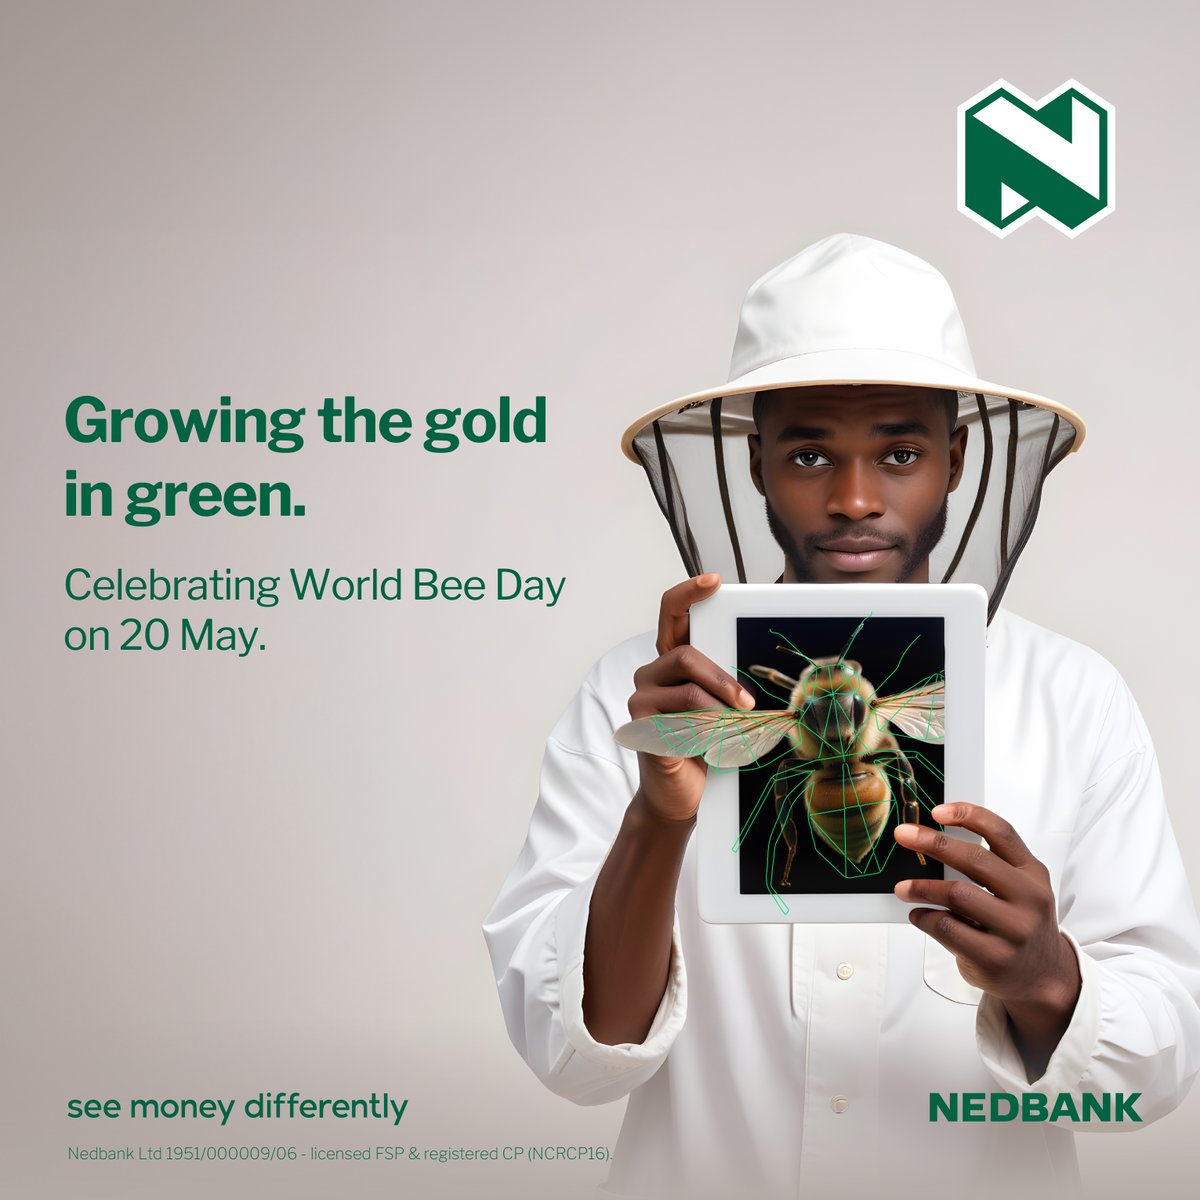 At Nedbank, we are celebrating #WorldBeeDay to raise awareness of the importance of pollinators, the threats they face and their contribution to sustainable development. 🐝 Read more here about our work with Vus’muzi Project: ow.ly/ysHM50RNFnA #GreenIsTheNewGold